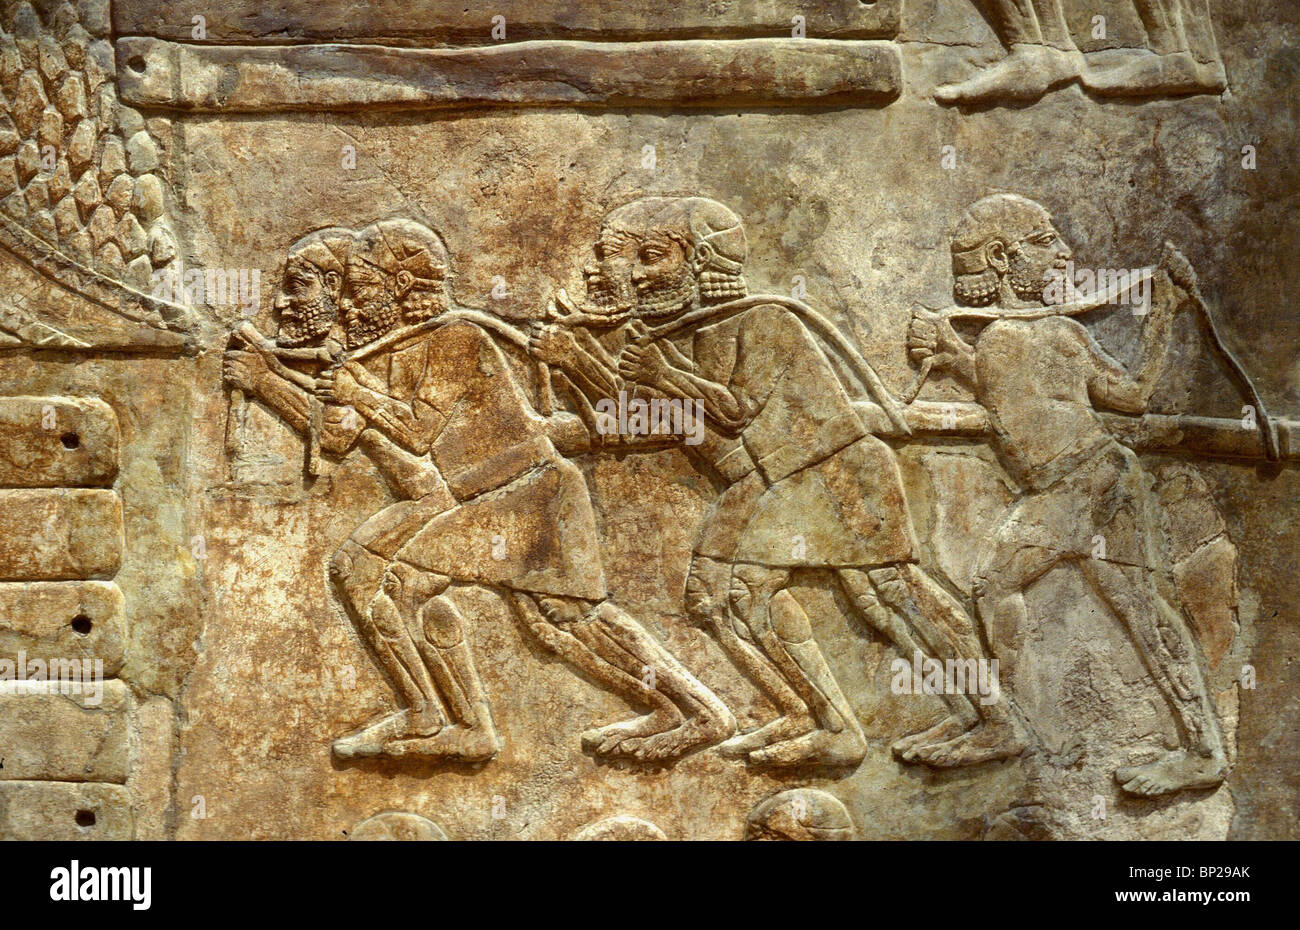 2844. SLAVES OR PRISONERS ON CONSTRUCTION WORK, RELIEF FROM KING SARAGON'S PALACE IN KORSABAD, C. 8TH. C. B.C. Stock Photo